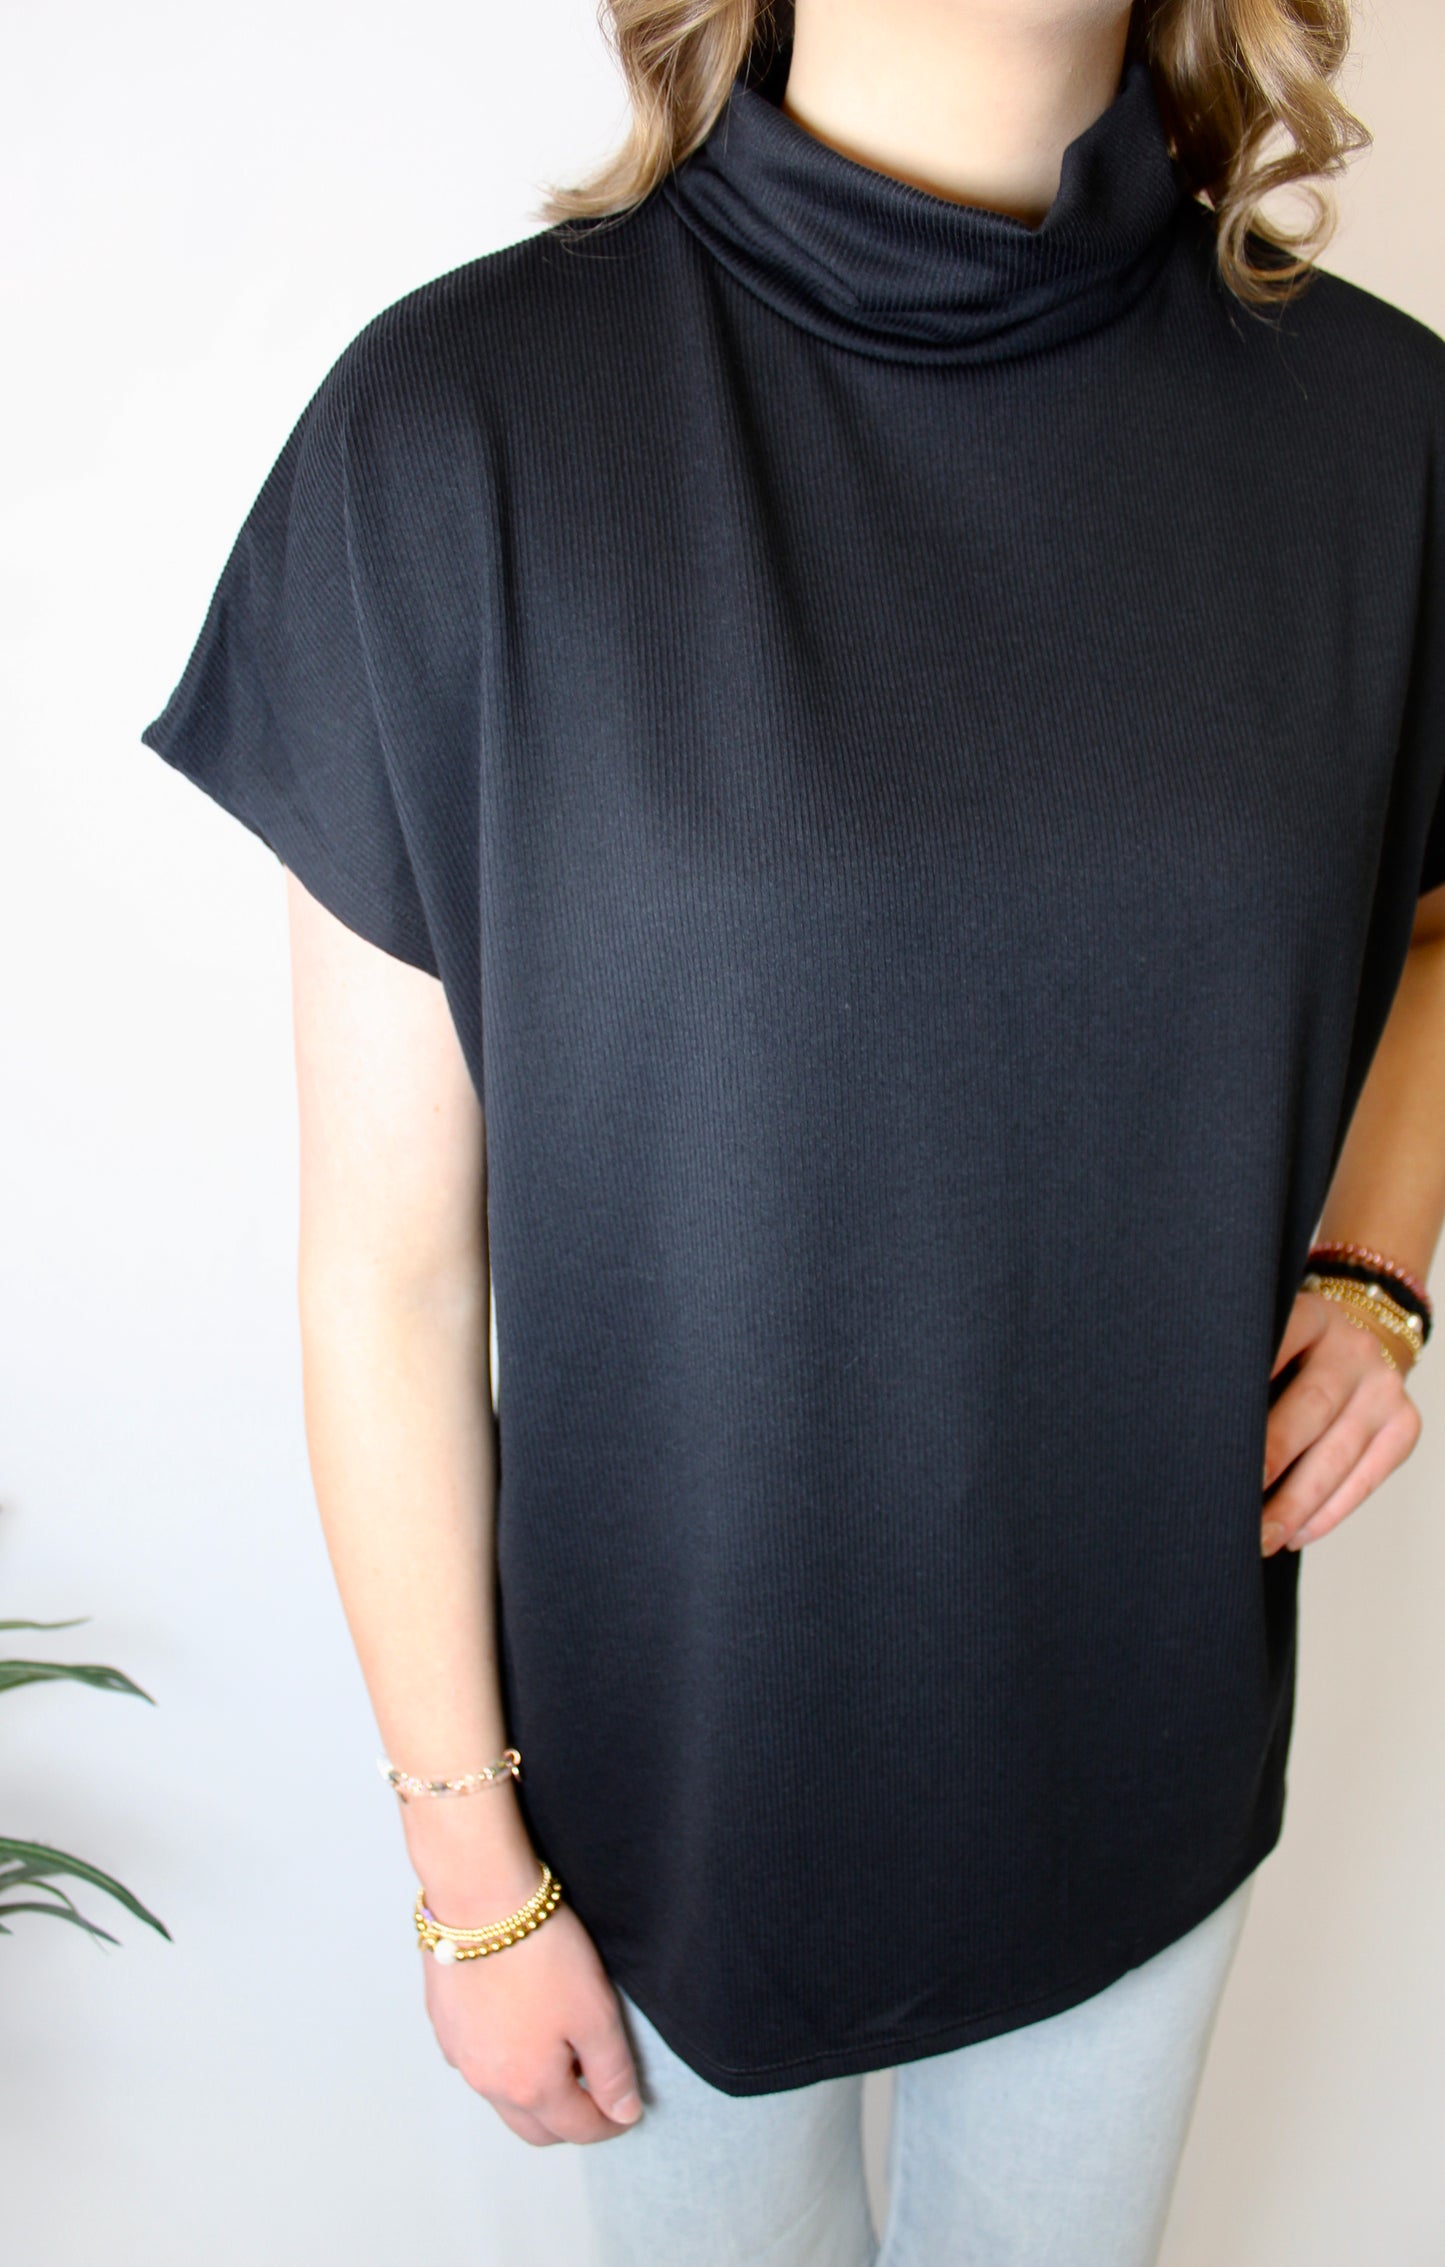 Down To The Basics Top In Black